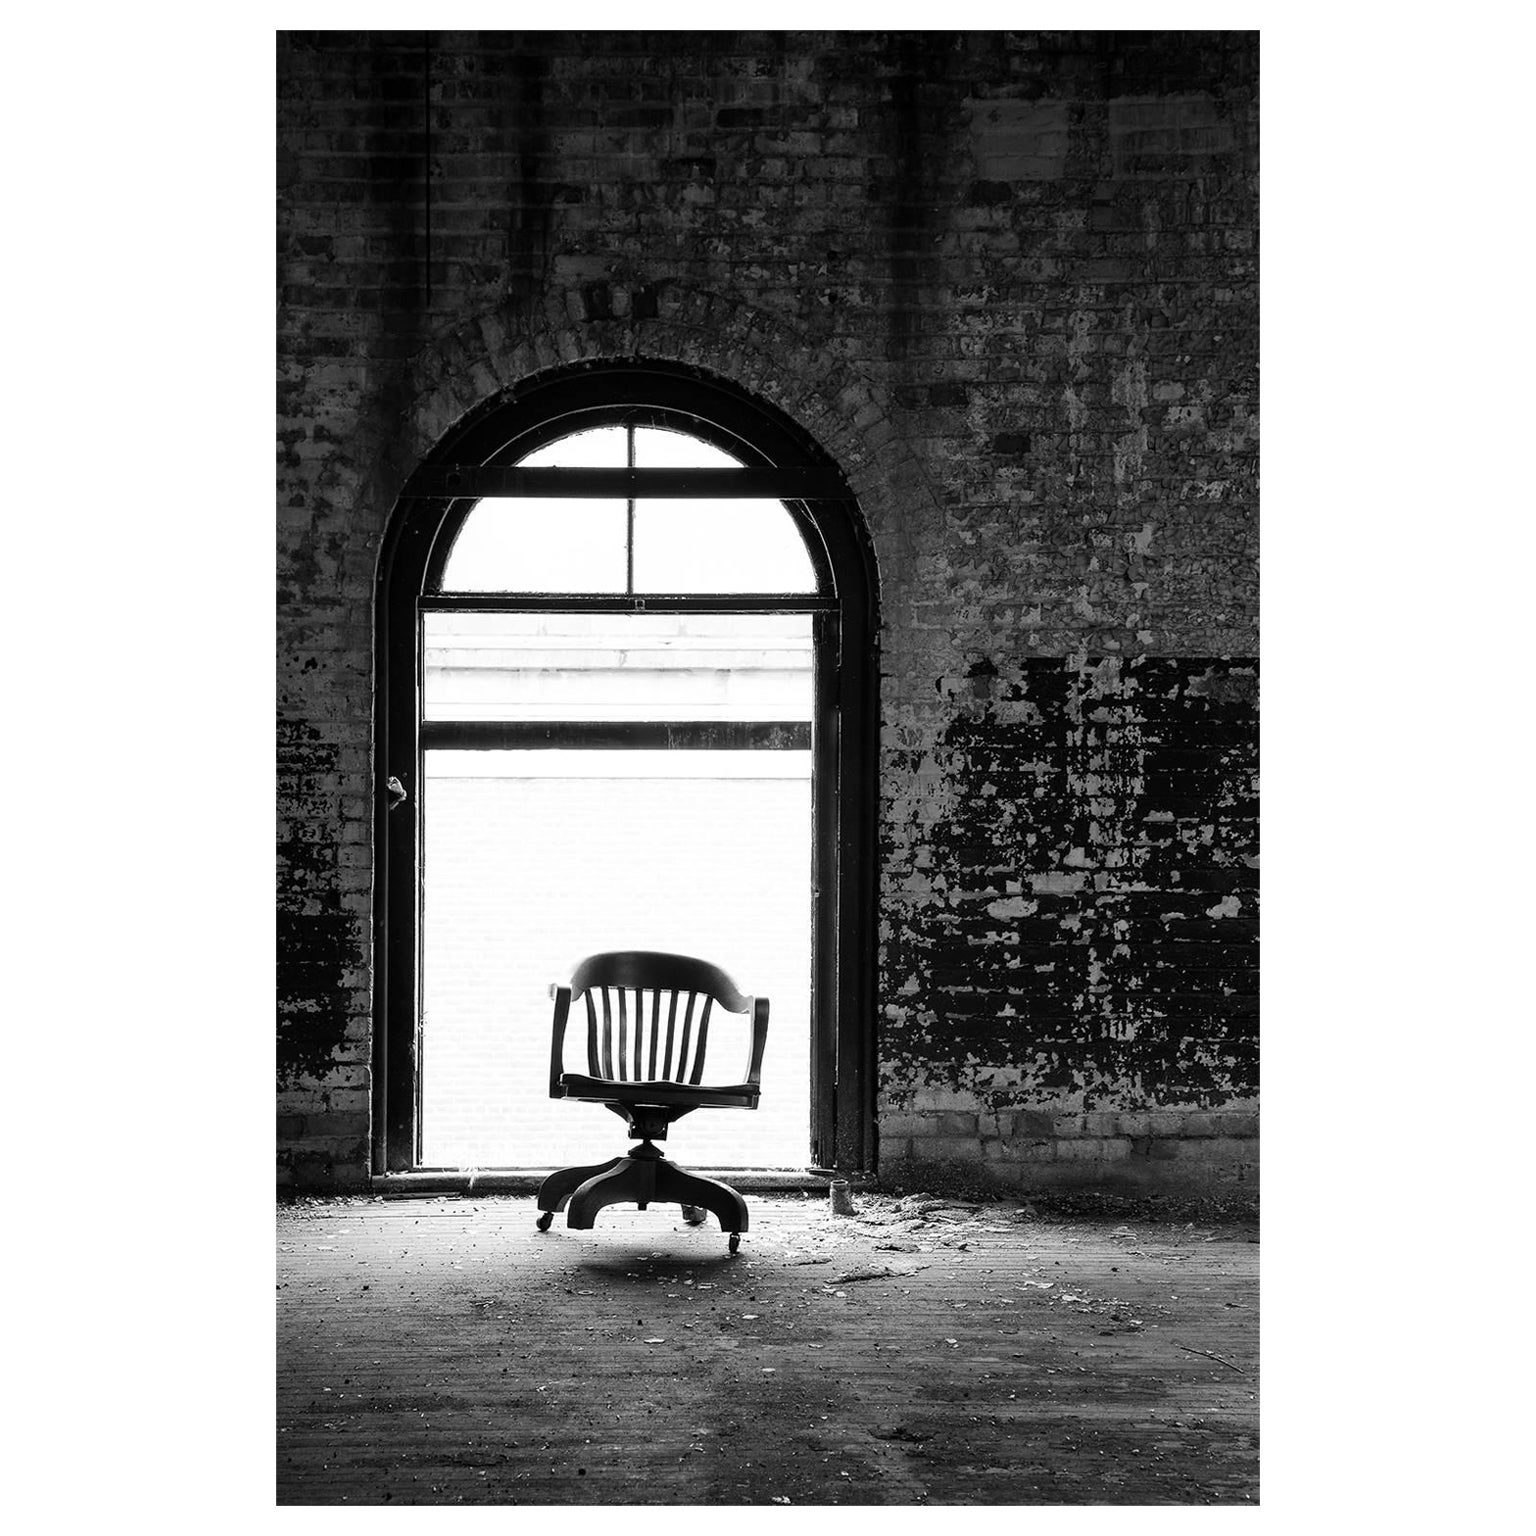 Rebecca Skinner Black and White Photograph - "Dancing Chair", contemporary, black, white, factory, industrial, photograph